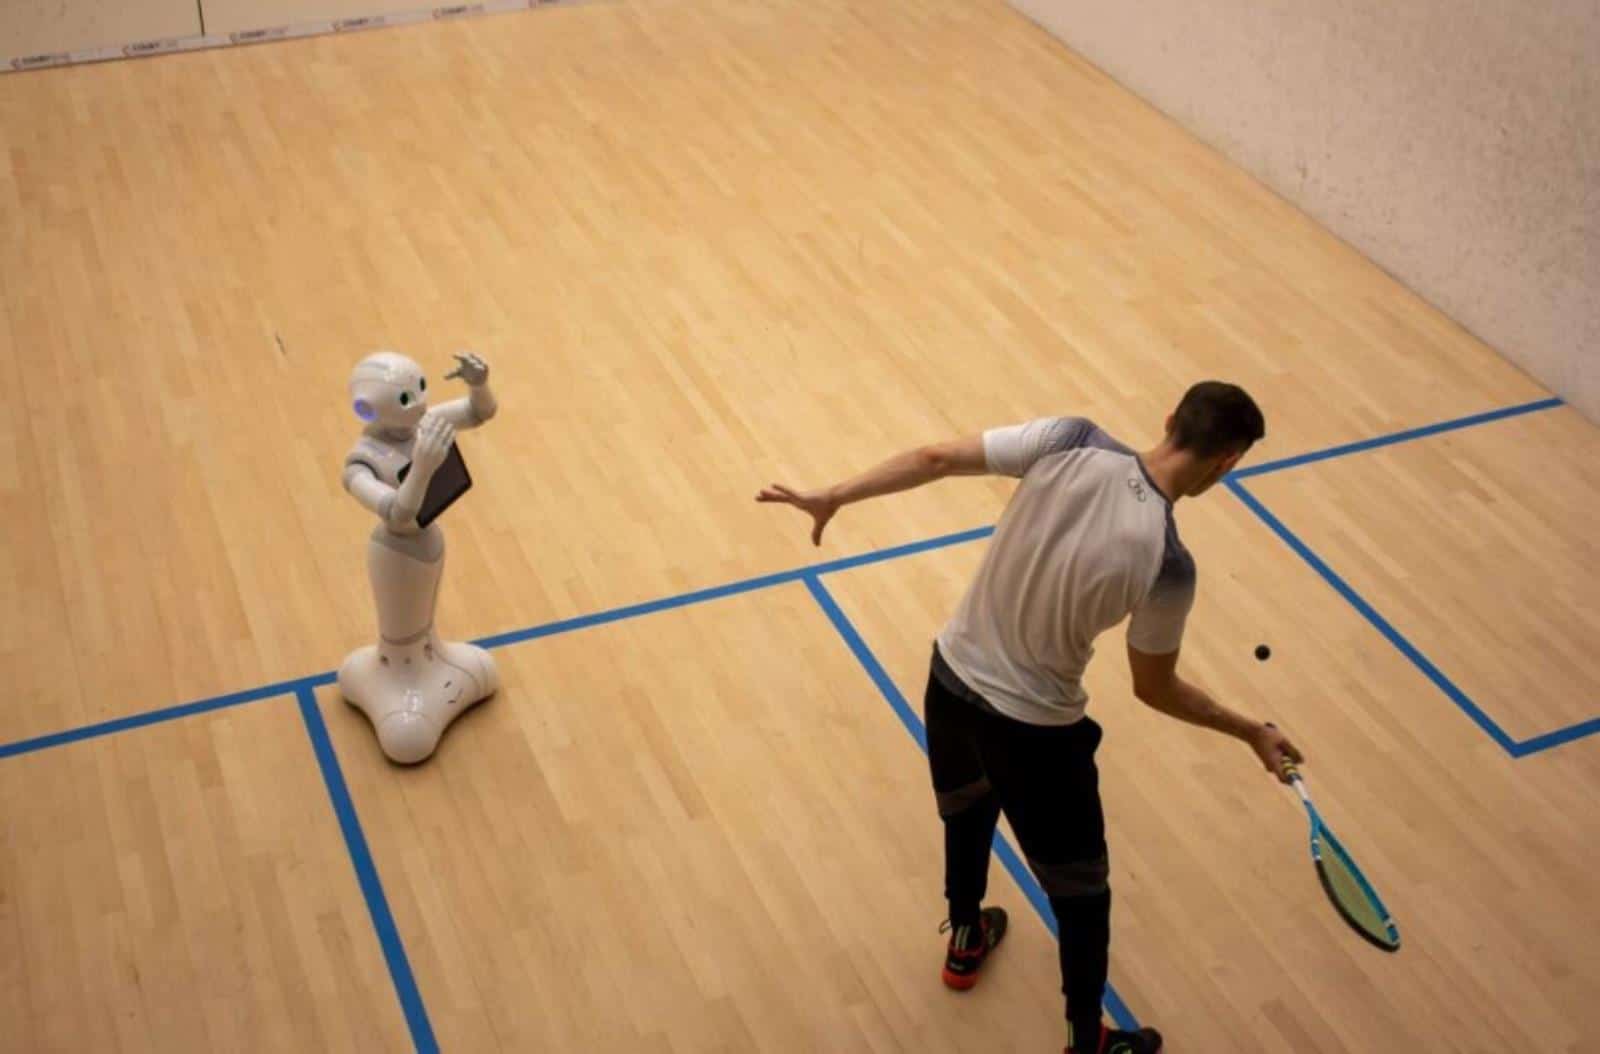 This is the world's first robotic squash trainer